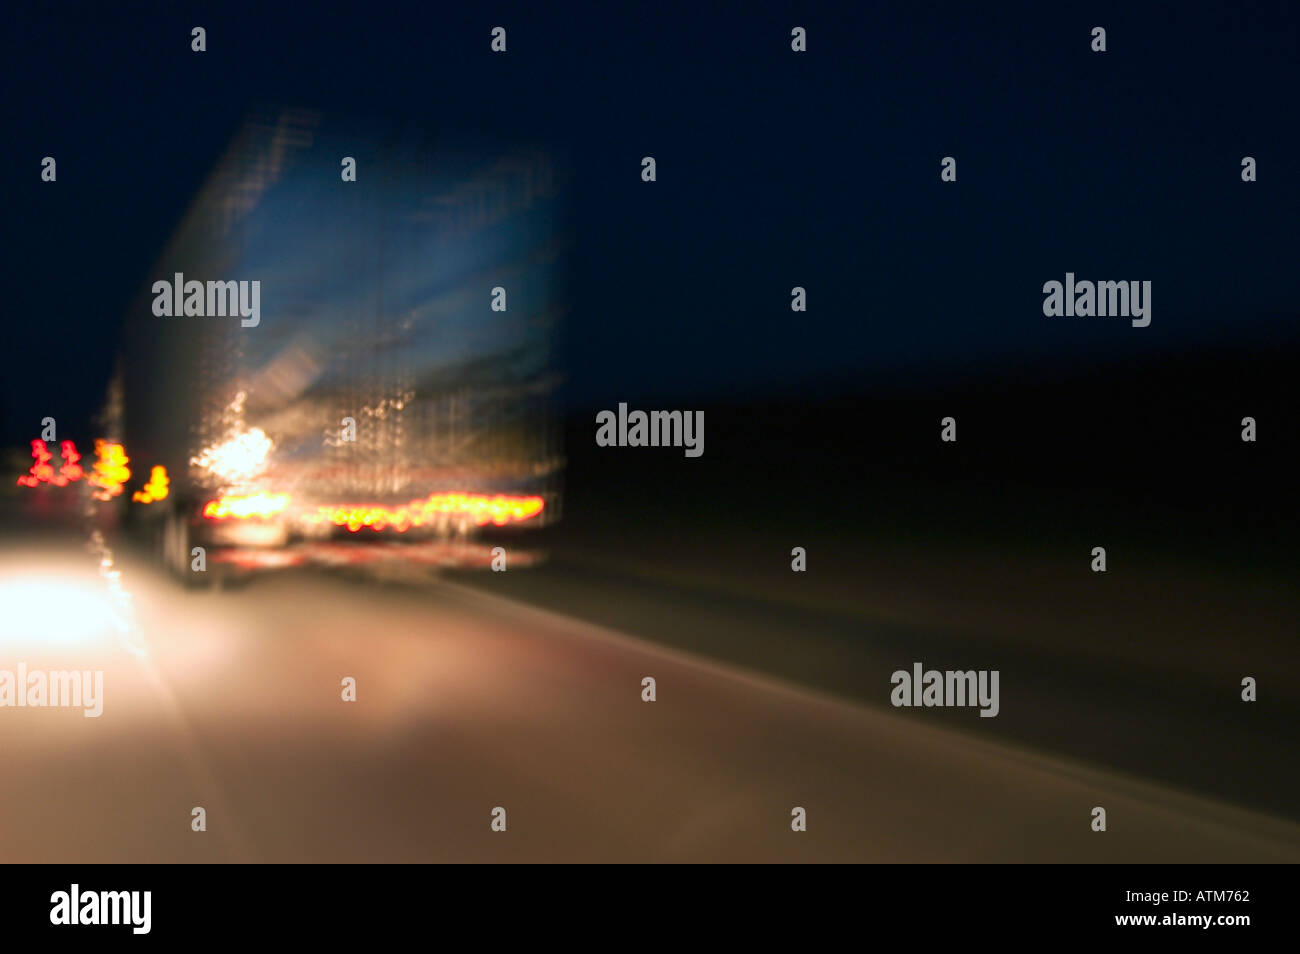 truck on highway at night Stock Photo